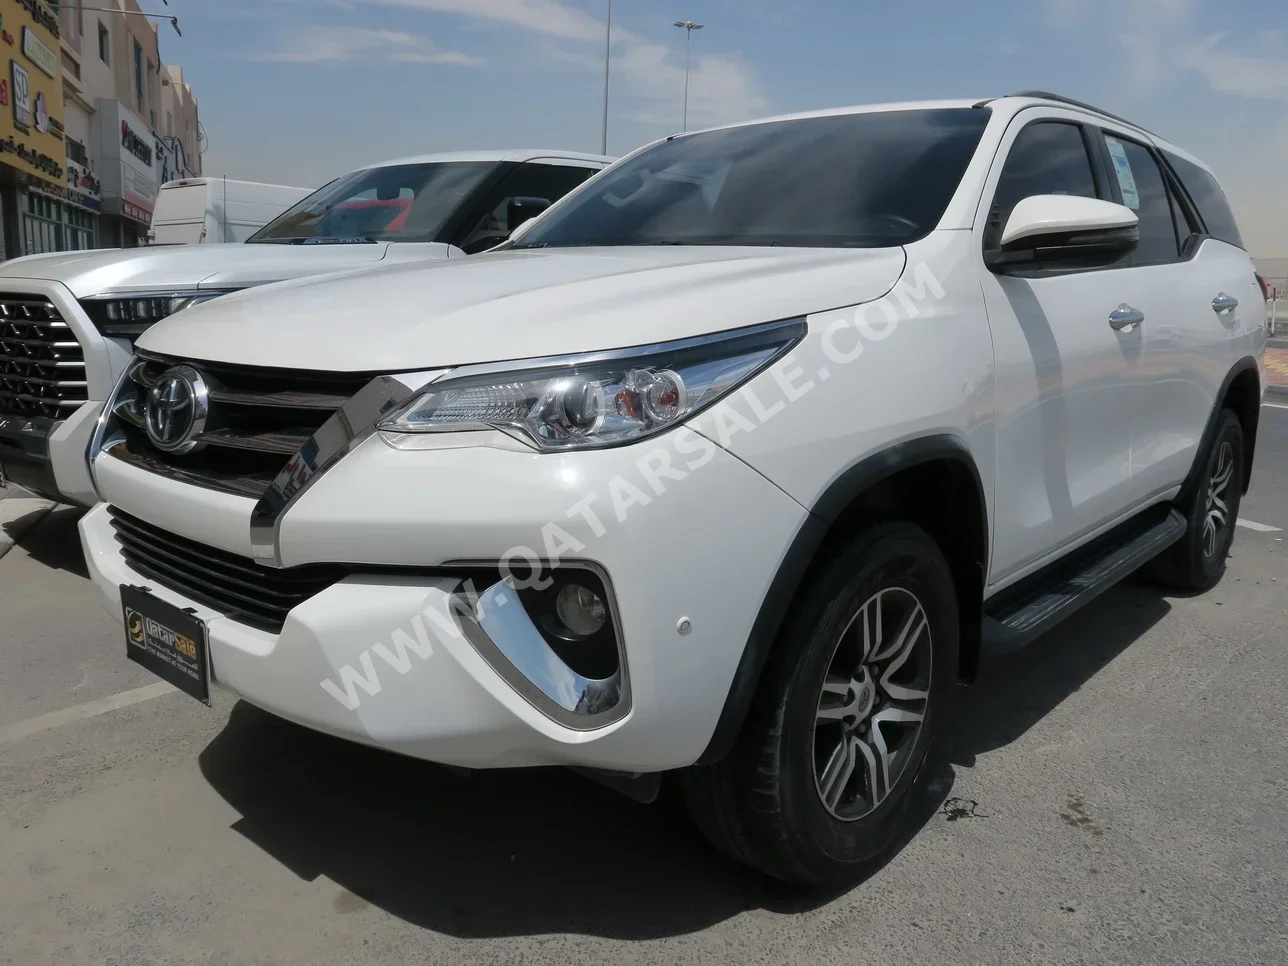 Toyota  Fortuner  2020  Automatic  45,000 Km  4 Cylinder  Four Wheel Drive (4WD)  SUV  White